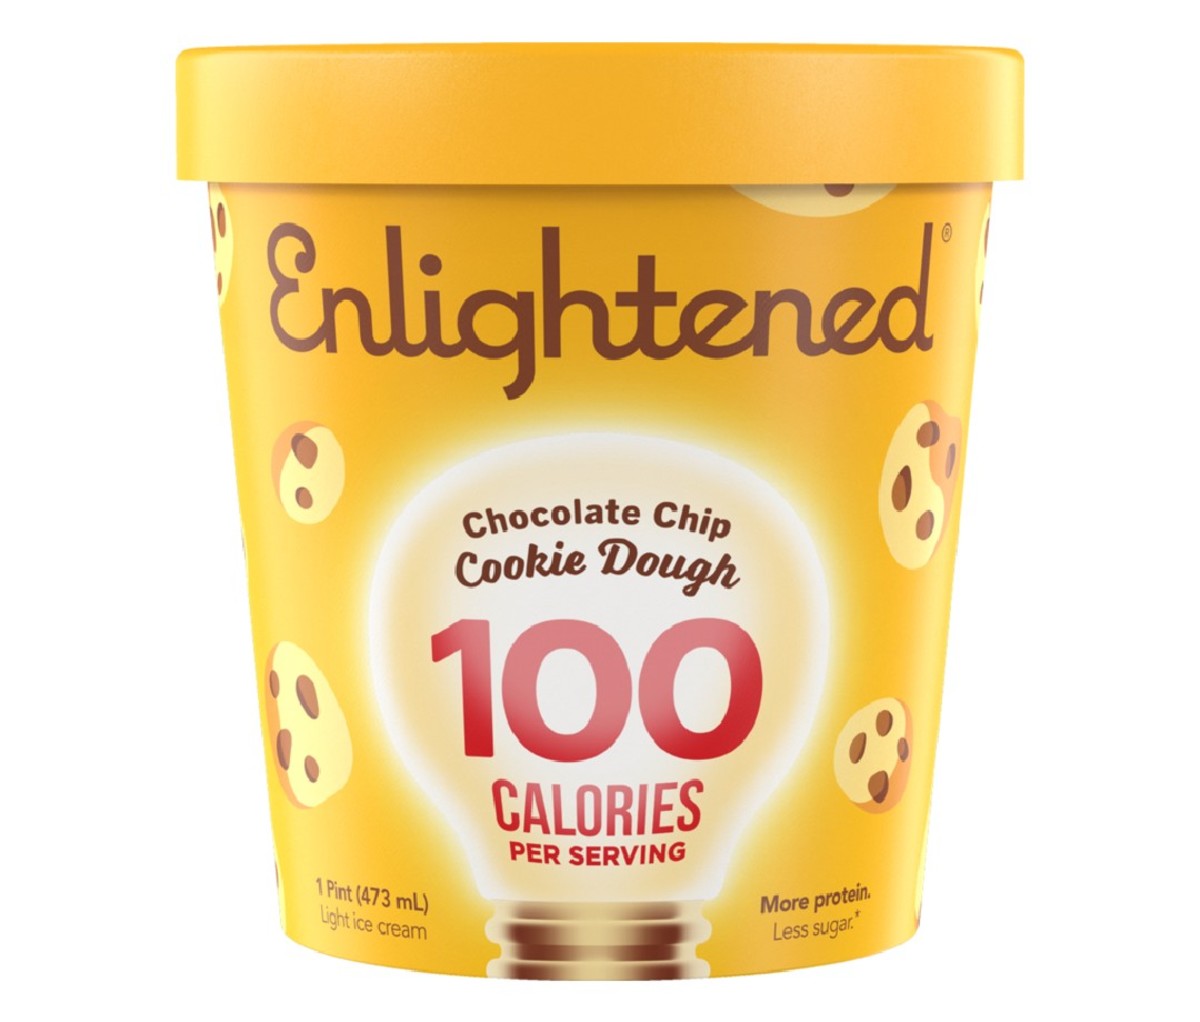 This is the high-protein, low-sugar ice cream you've been looking for. Enlightened Ice Cream is real ice cream but the kind that you don’t have to feel guilty about eating.